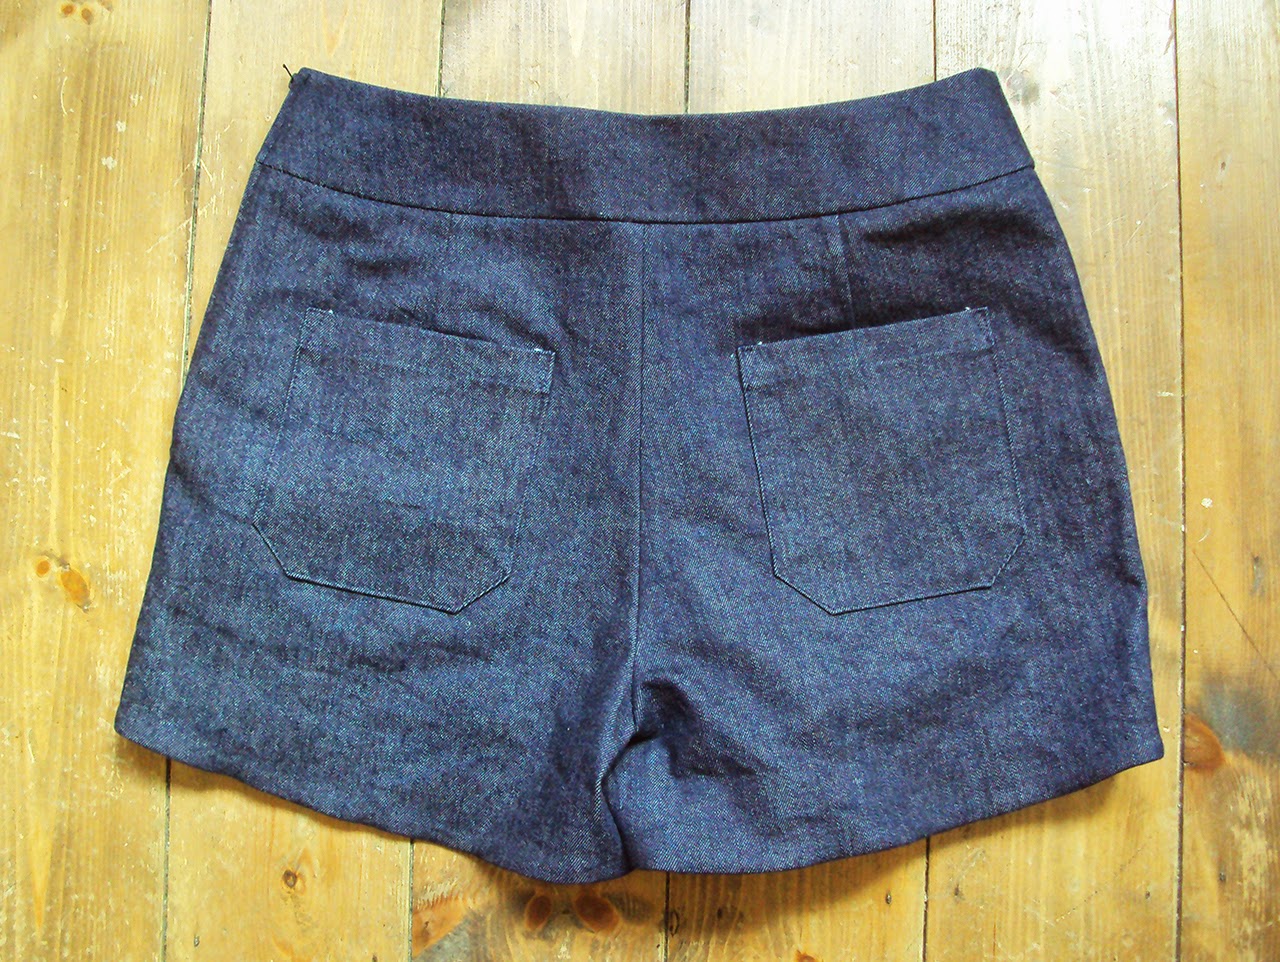 'So, Zo...': The Would-be Denim Sweet Shorts